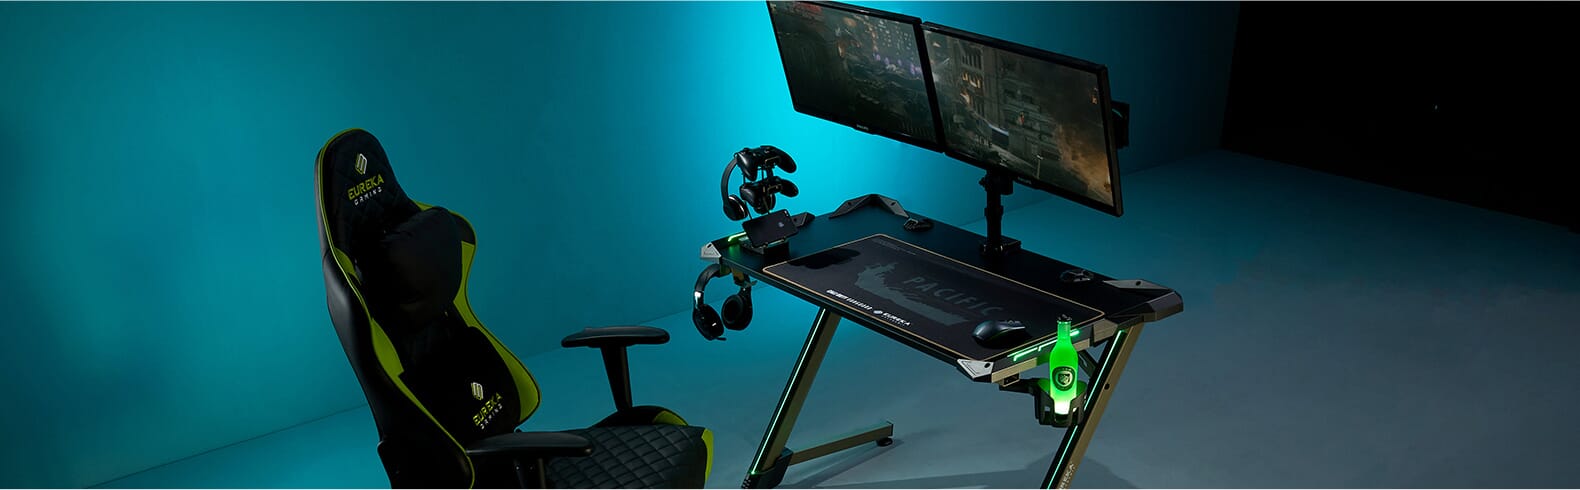 GAMING DESK: UAV RGB With Accessory Hook - Game Room WIth Green Gaming Chair - Dual Monitors - EUREKA ERGONOMIC GAMING-DESKS SCENE8